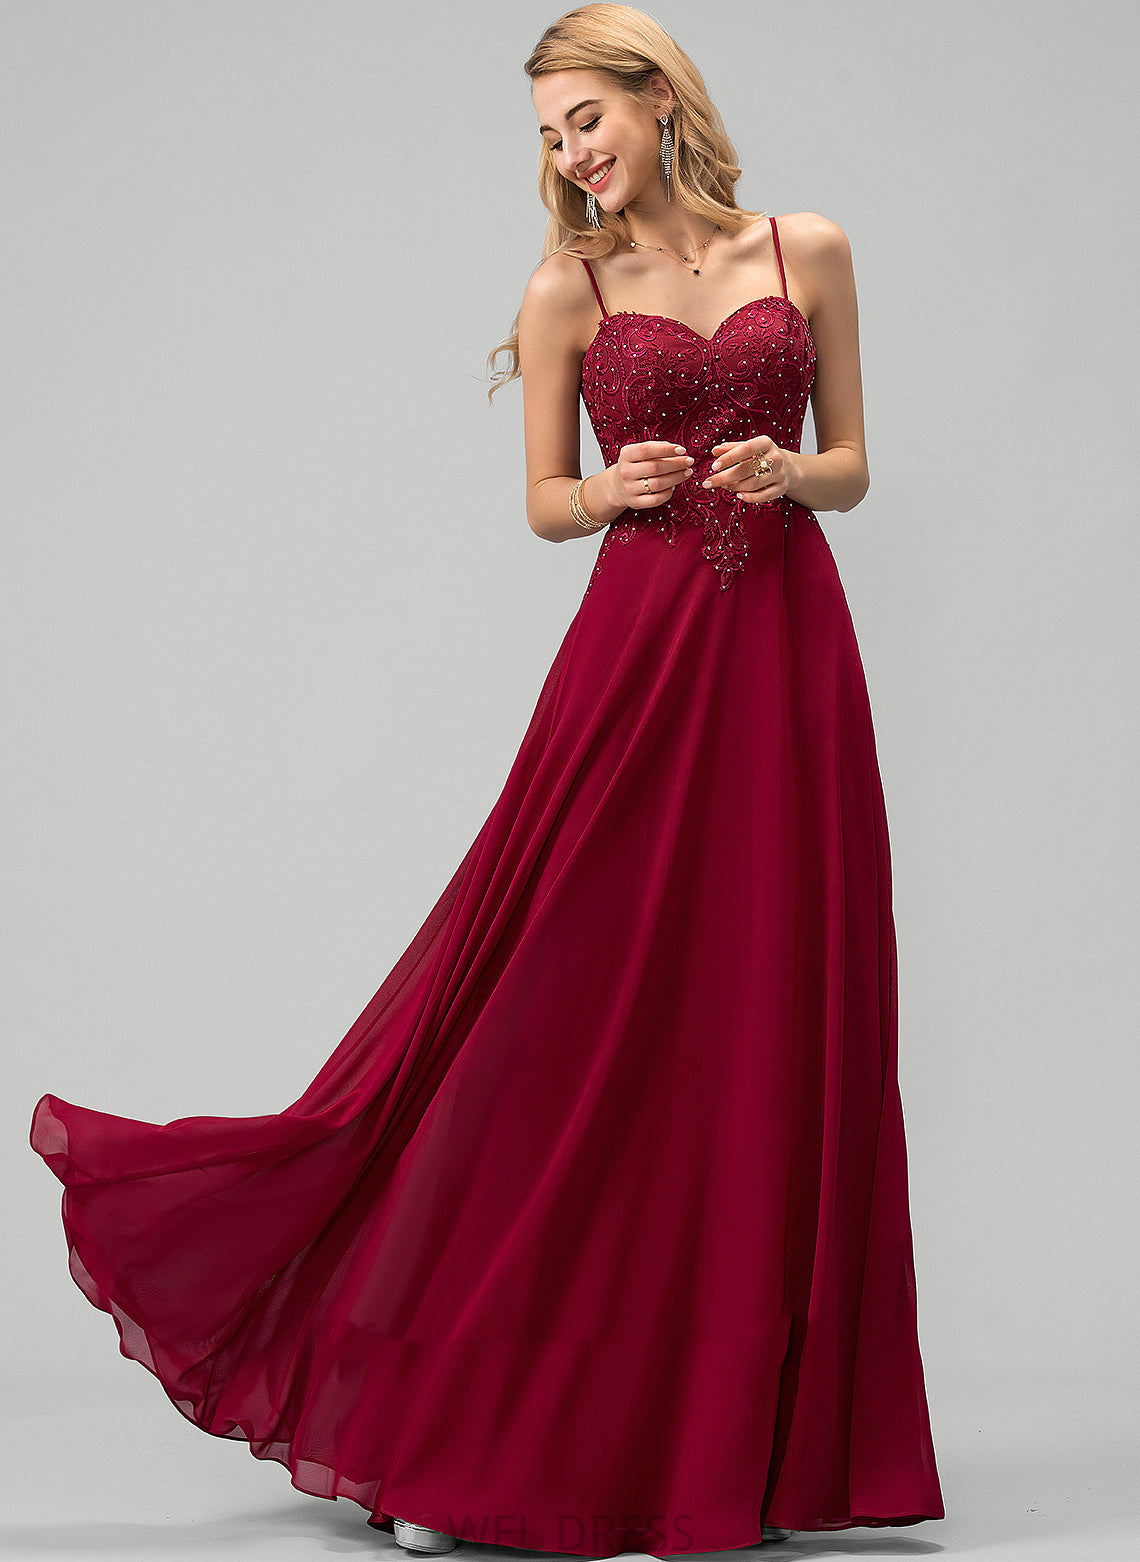 Prom Dresses With Floor-Length Sweetheart Lace Mariana Beading Sequins A-Line Chiffon